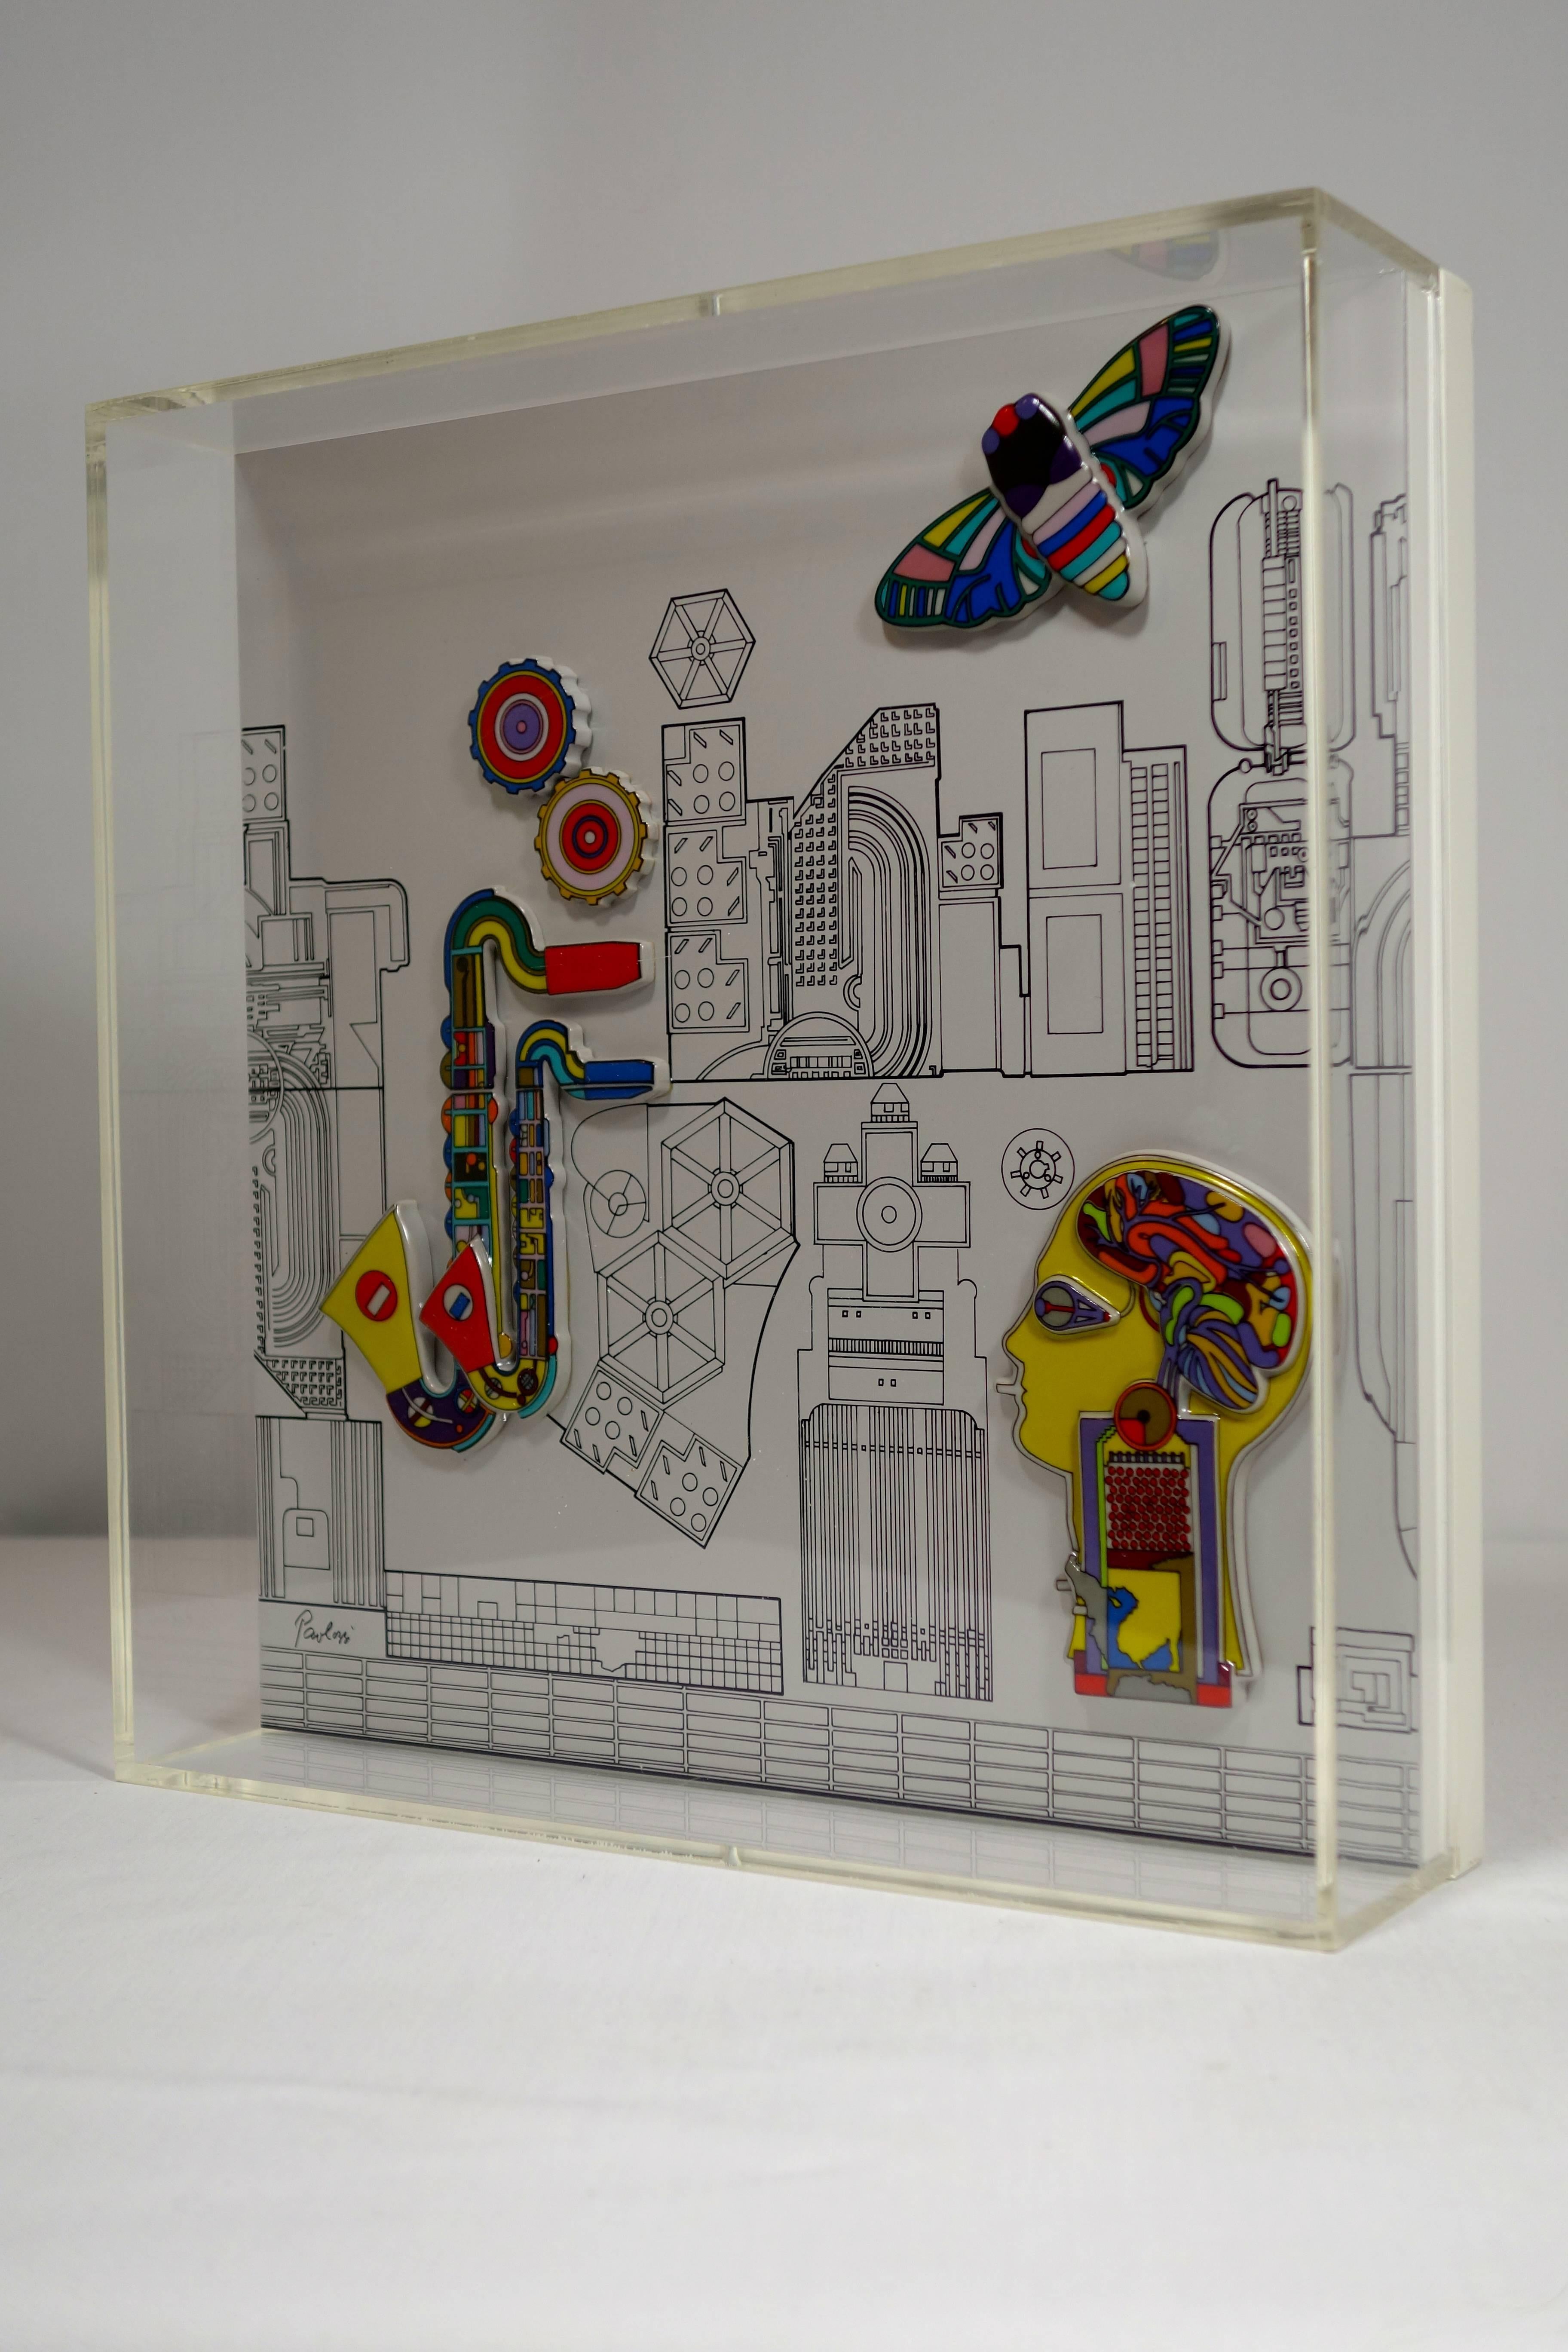 Wall Object 'Jahresobjekt in Keramik 1985' by Sir Eduardo Paolozzi for Rosenthal.

Limited edition by Sir Eduardo Paolozzi (1924-2005).

A ceramic multiple in colors, 1985, numbered 500/060, published by Rosenthal as 